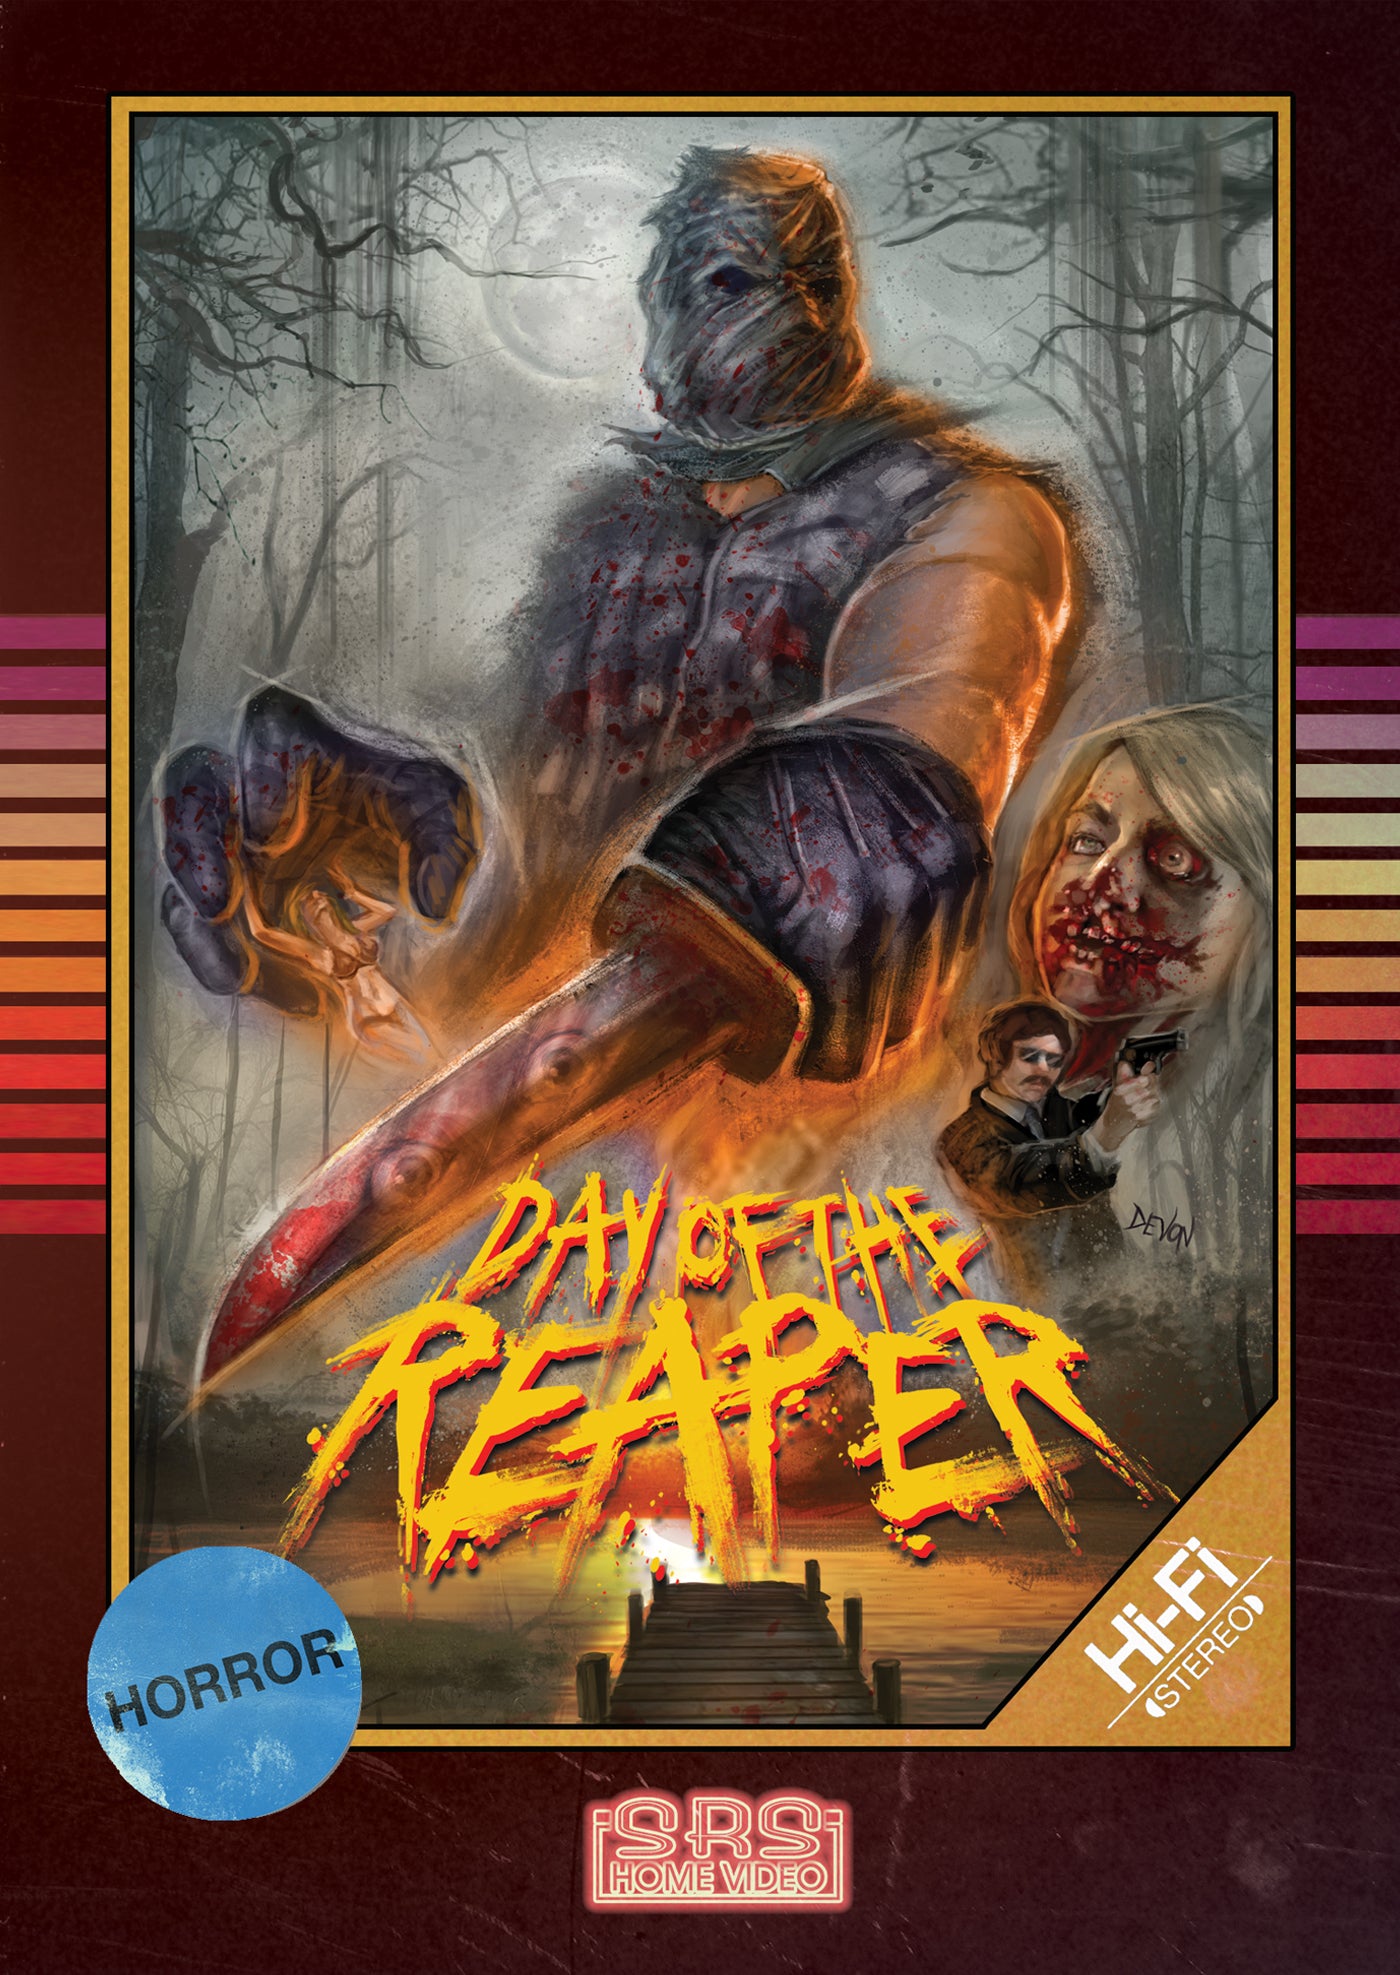 DAY OF THE REAPER DVD